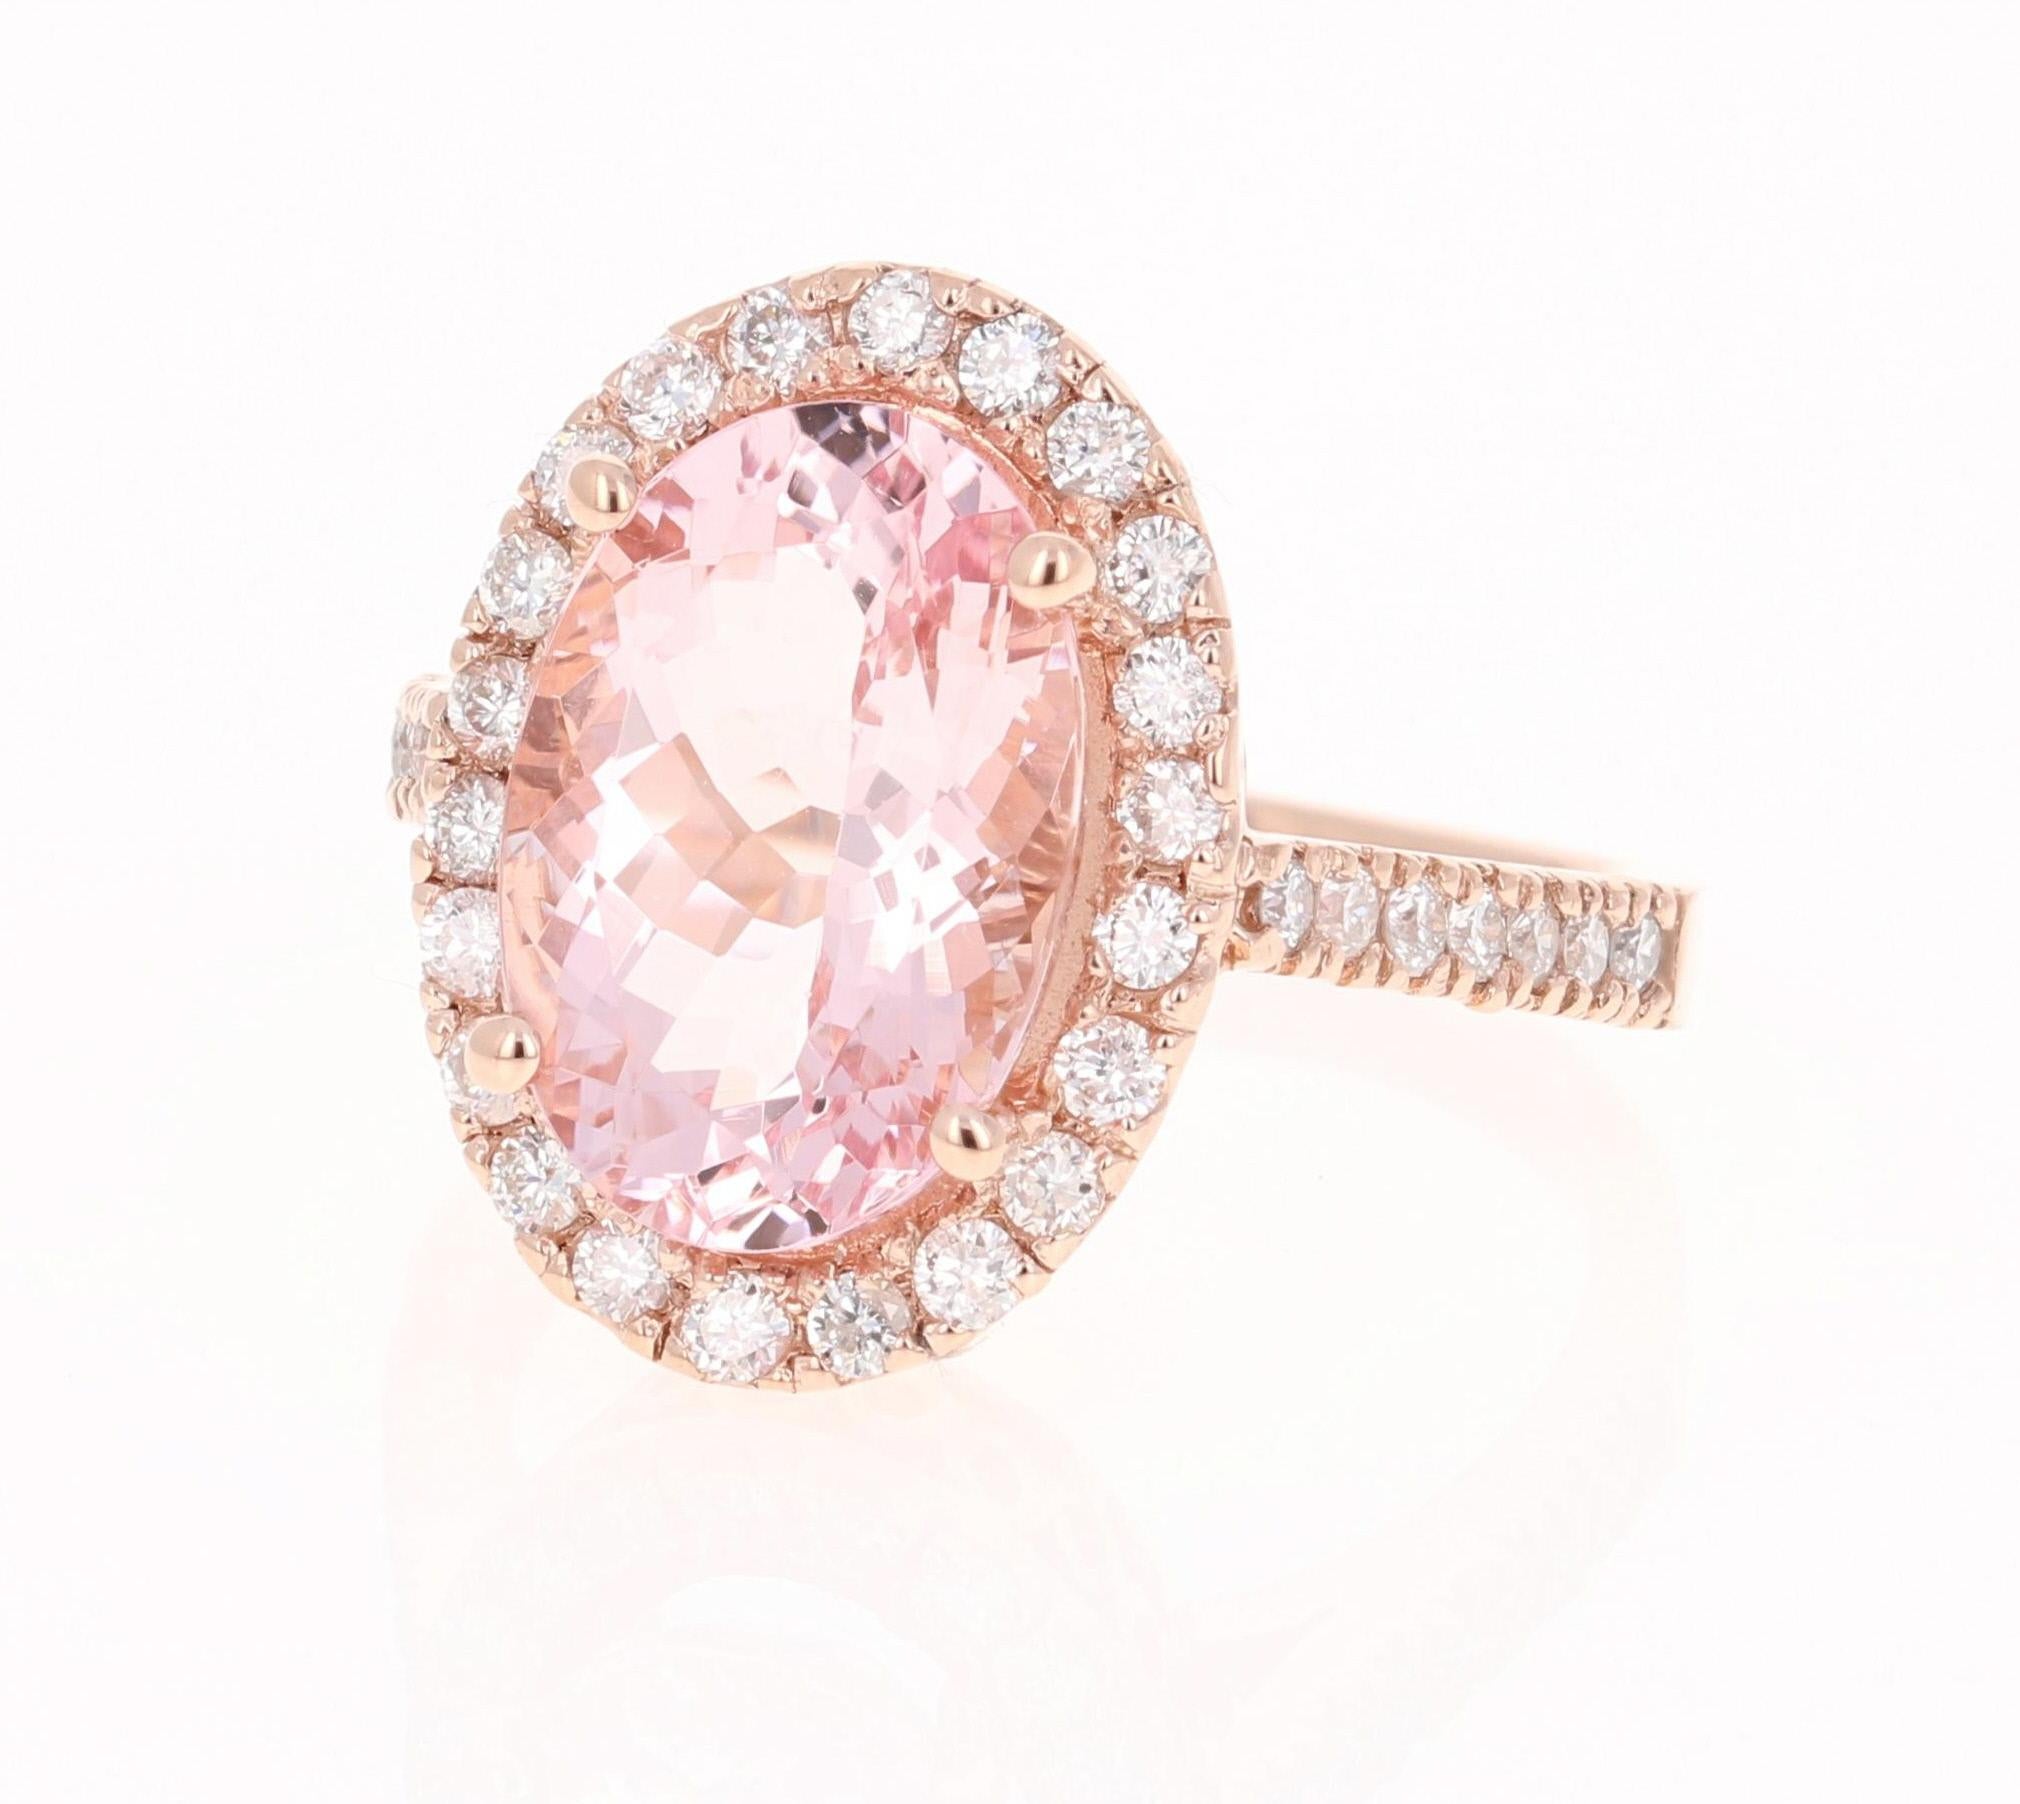 An affordable alternative to a Pink Diamond!

This beautifully and uniquely crafted ring has large Oval Cut Pink Morganite that weighs 4.31 carats as its center stone.  And it is surrounded by a Halo of 36 Round Cut Diamonds that weigh 0.68 carats. 